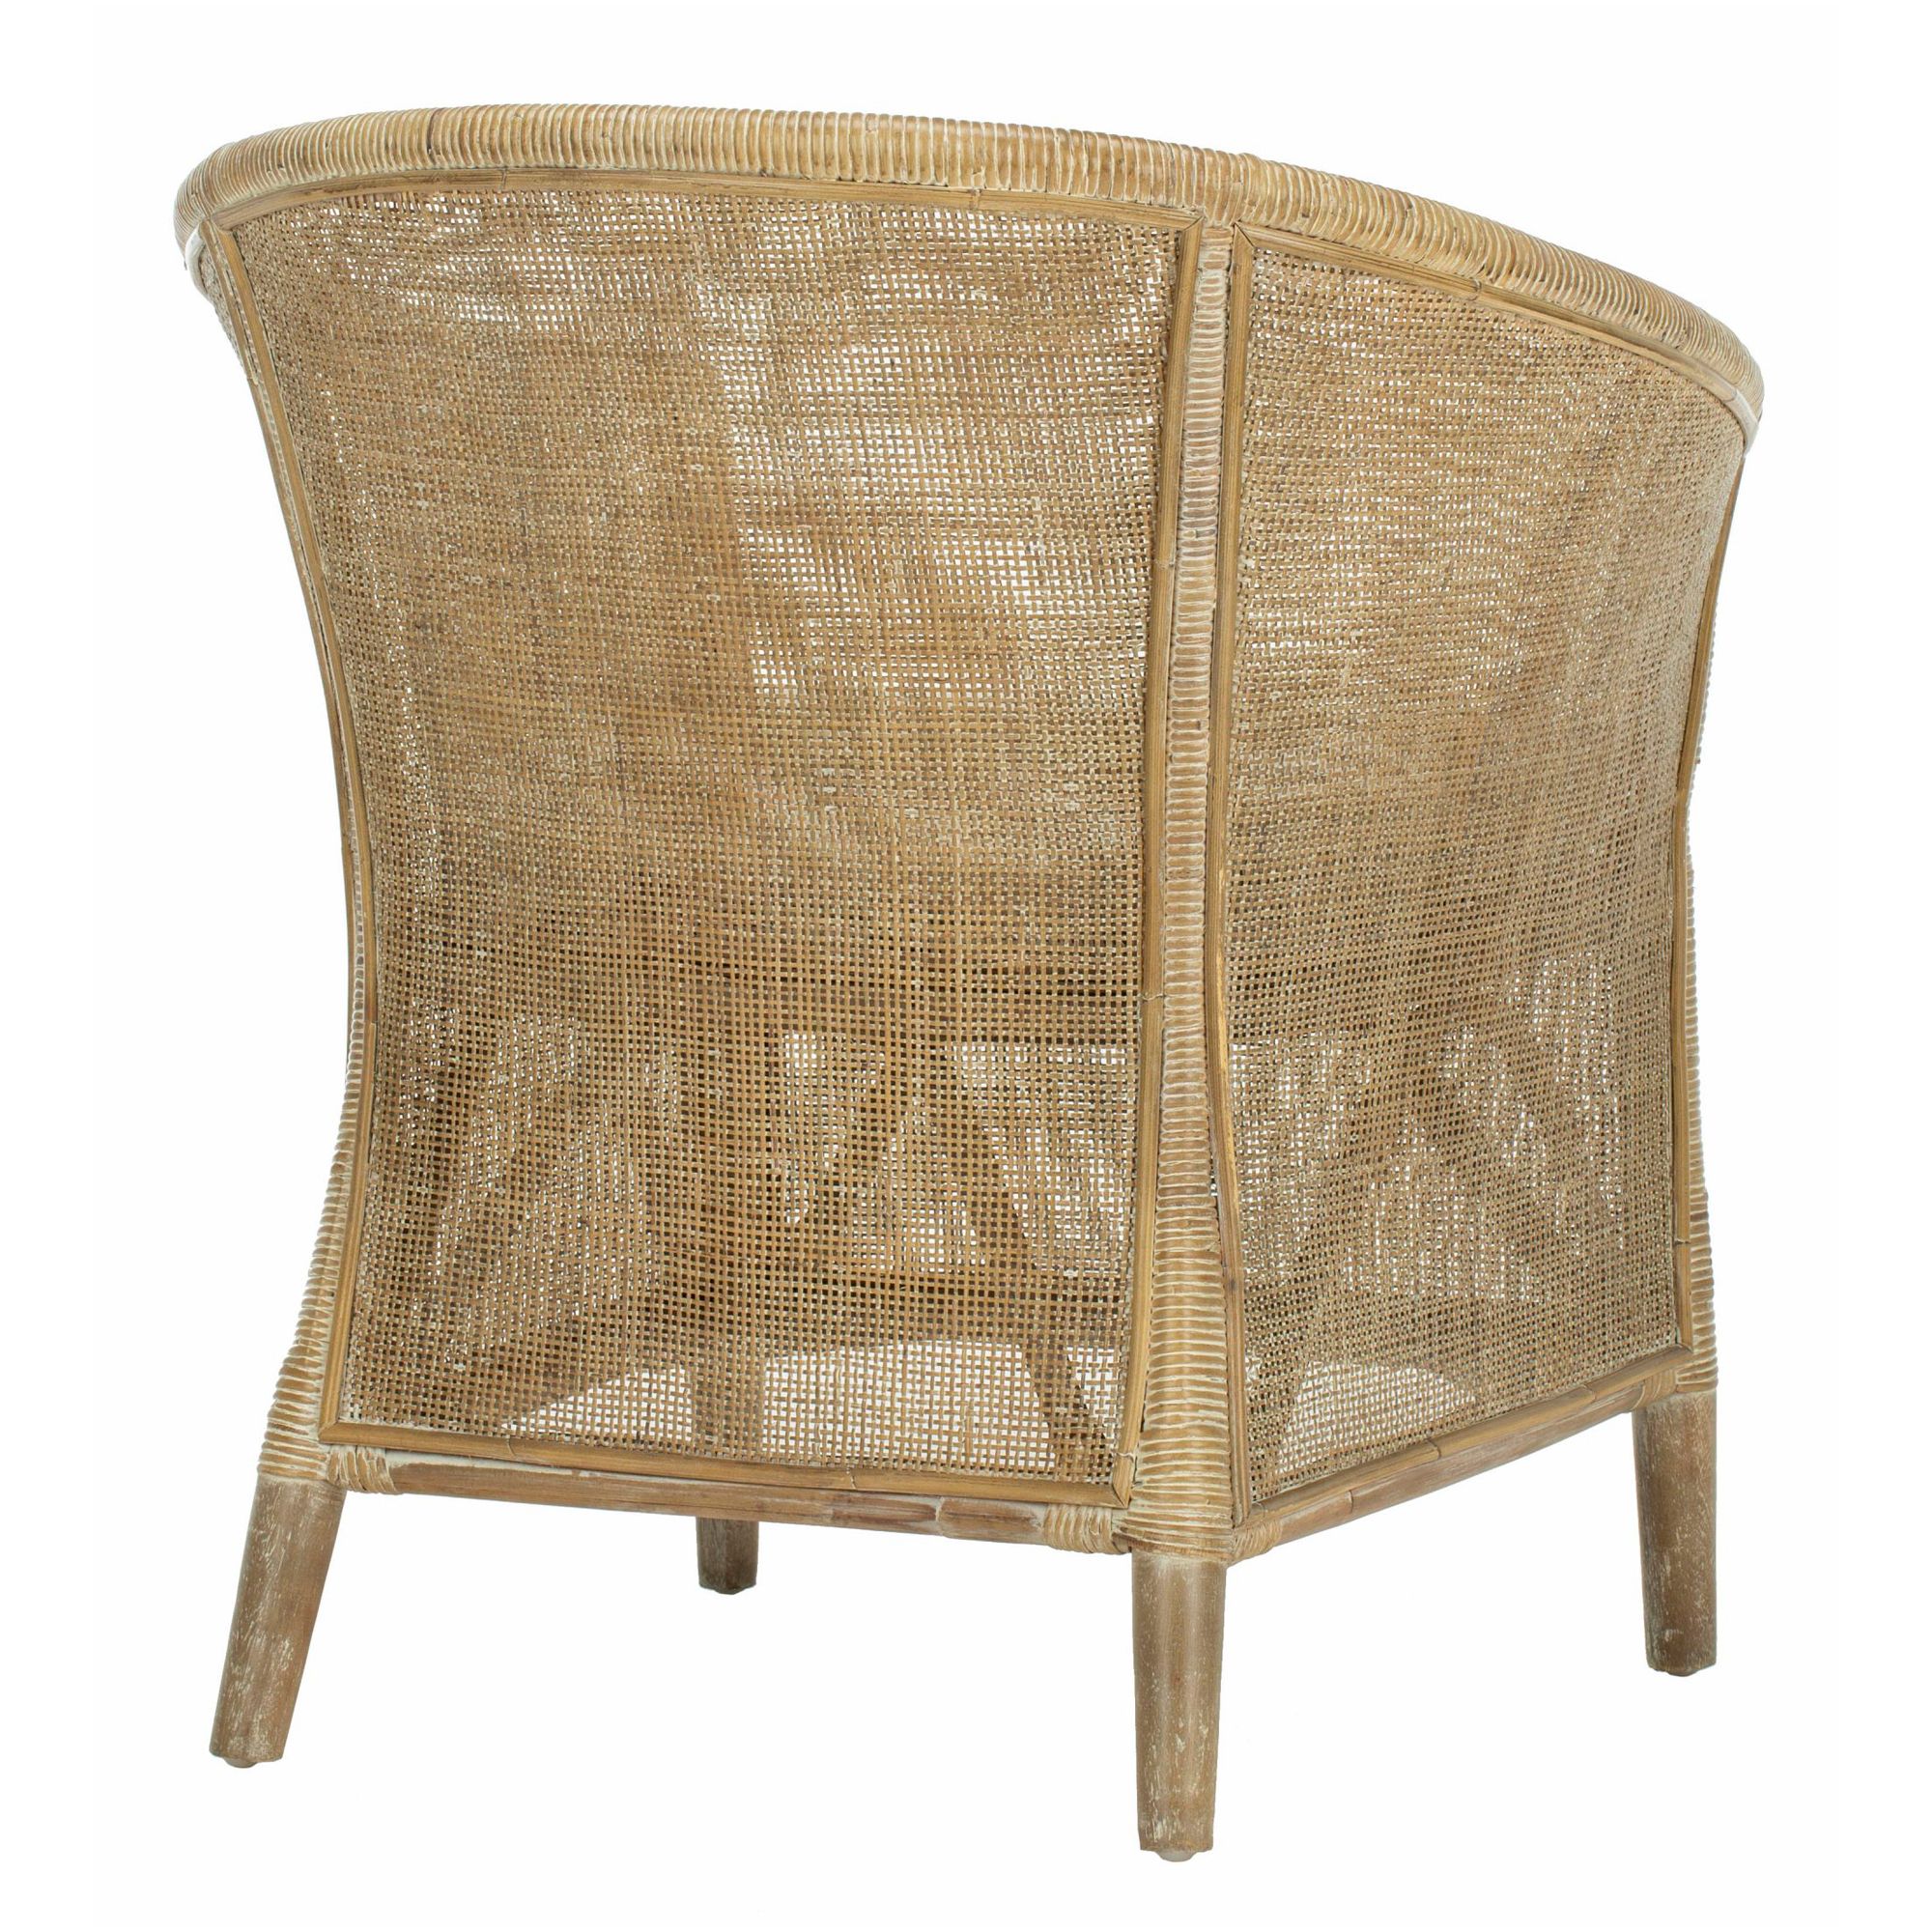 Alexana Rattan Armchair For Current White Fabric Outdoor Wicker Armchairs (View 11 of 15)